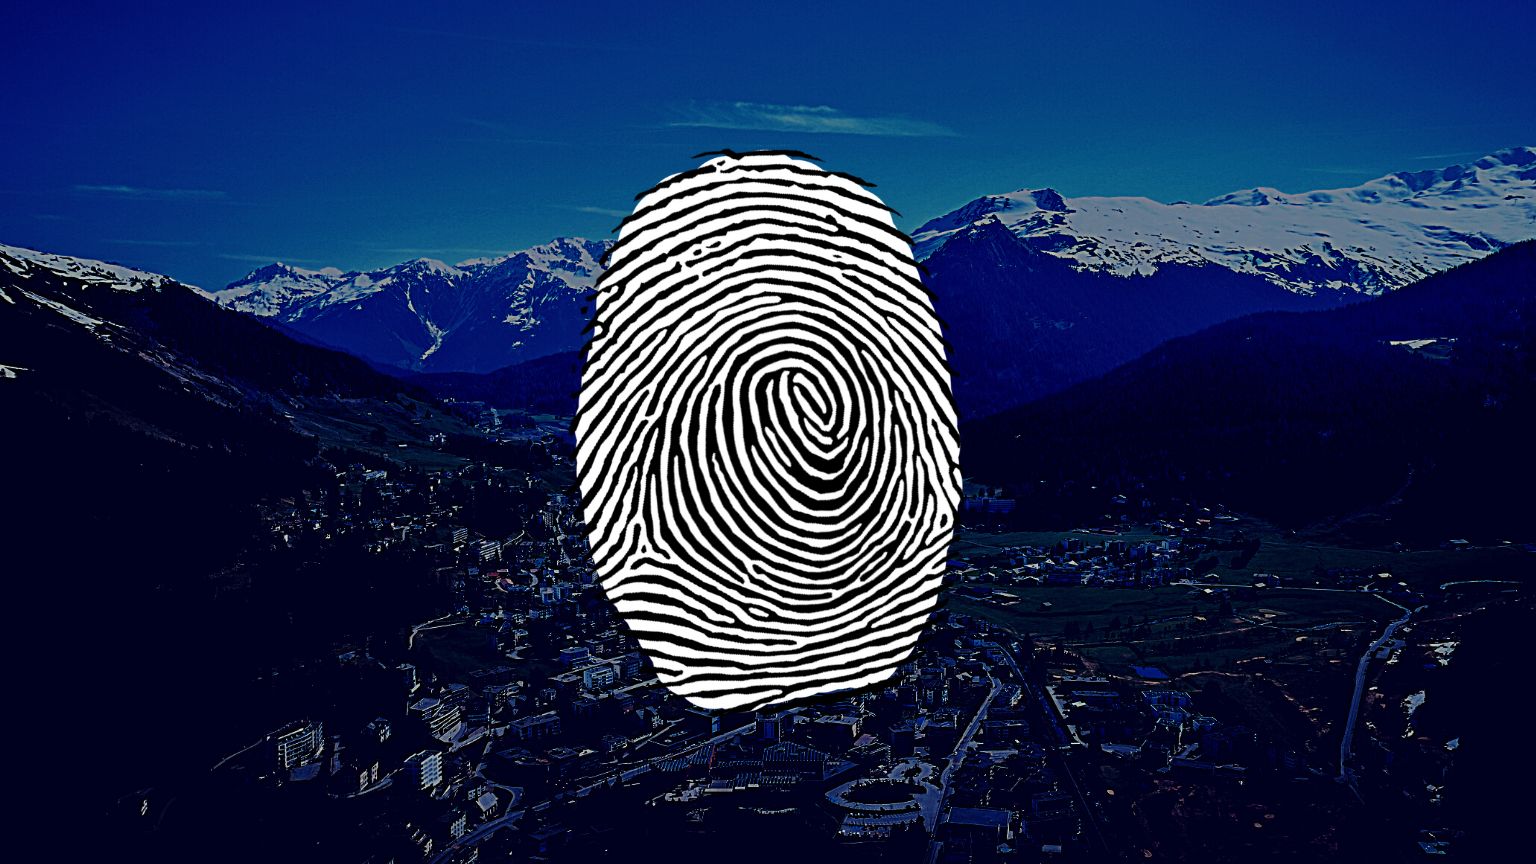 World Economic Forum 2023 implements digital ID badges, biometric scanning for journalists to enter